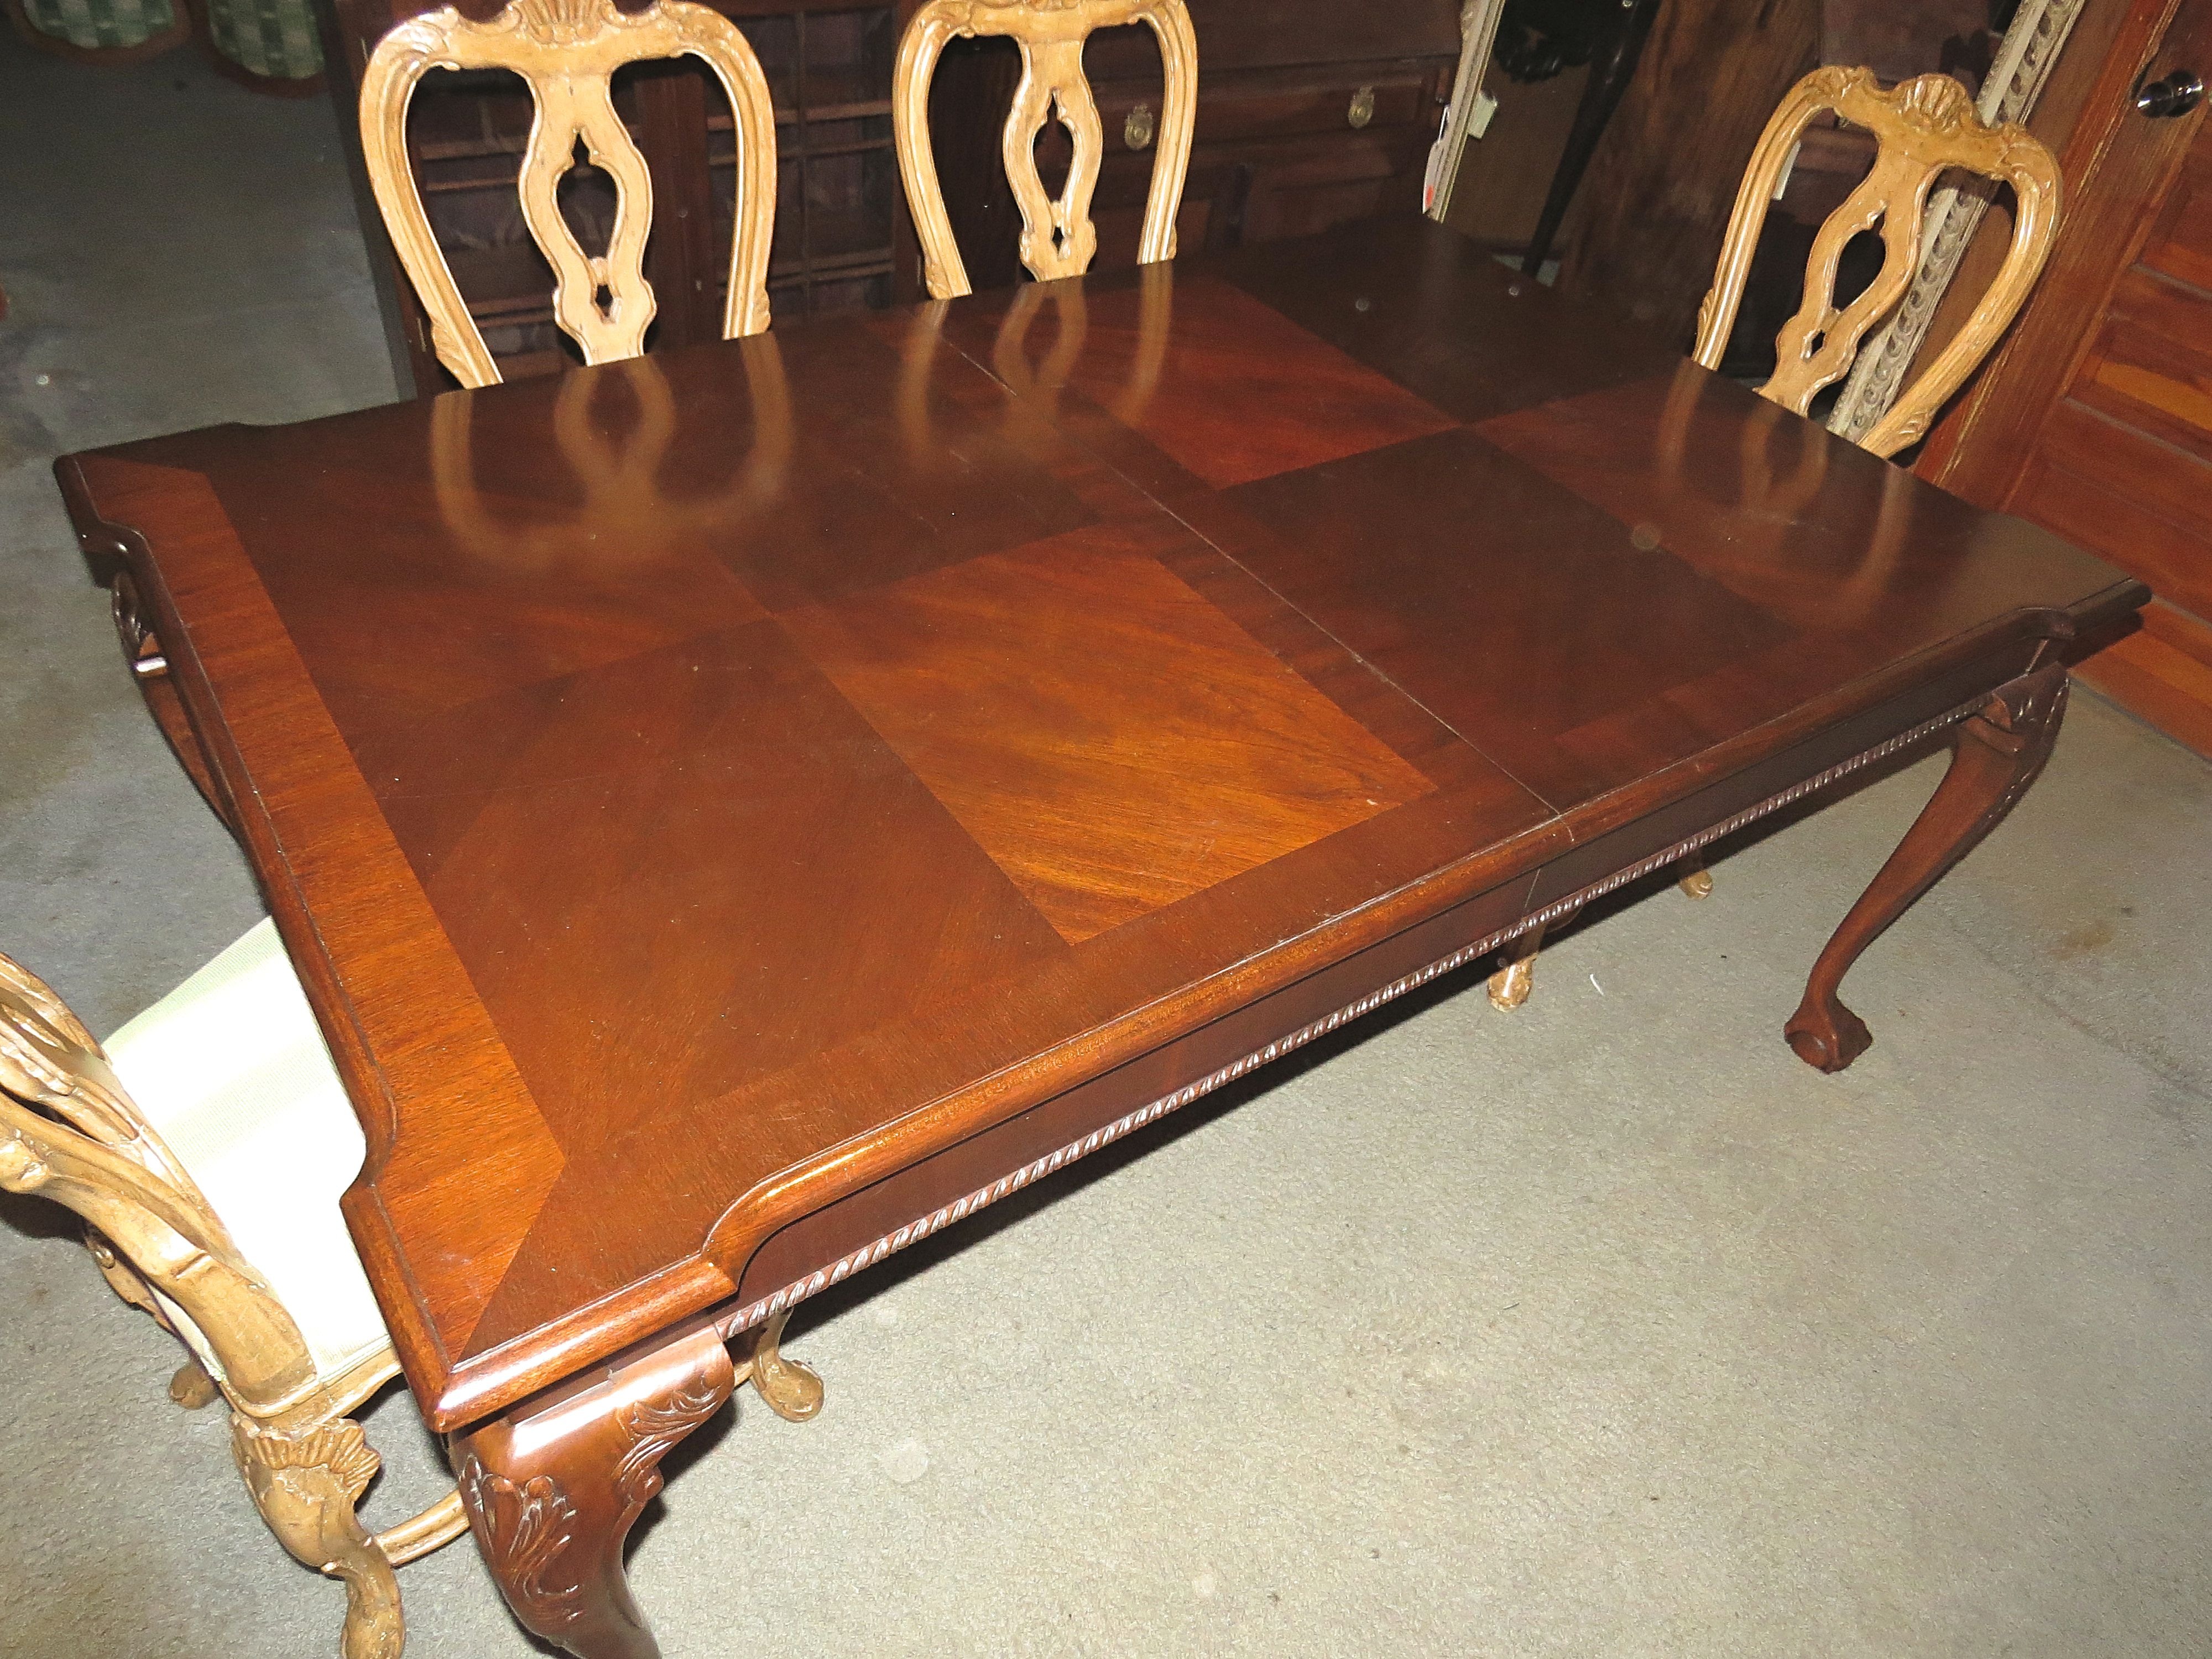 Mahogany Dining Table with Silverware Drawers